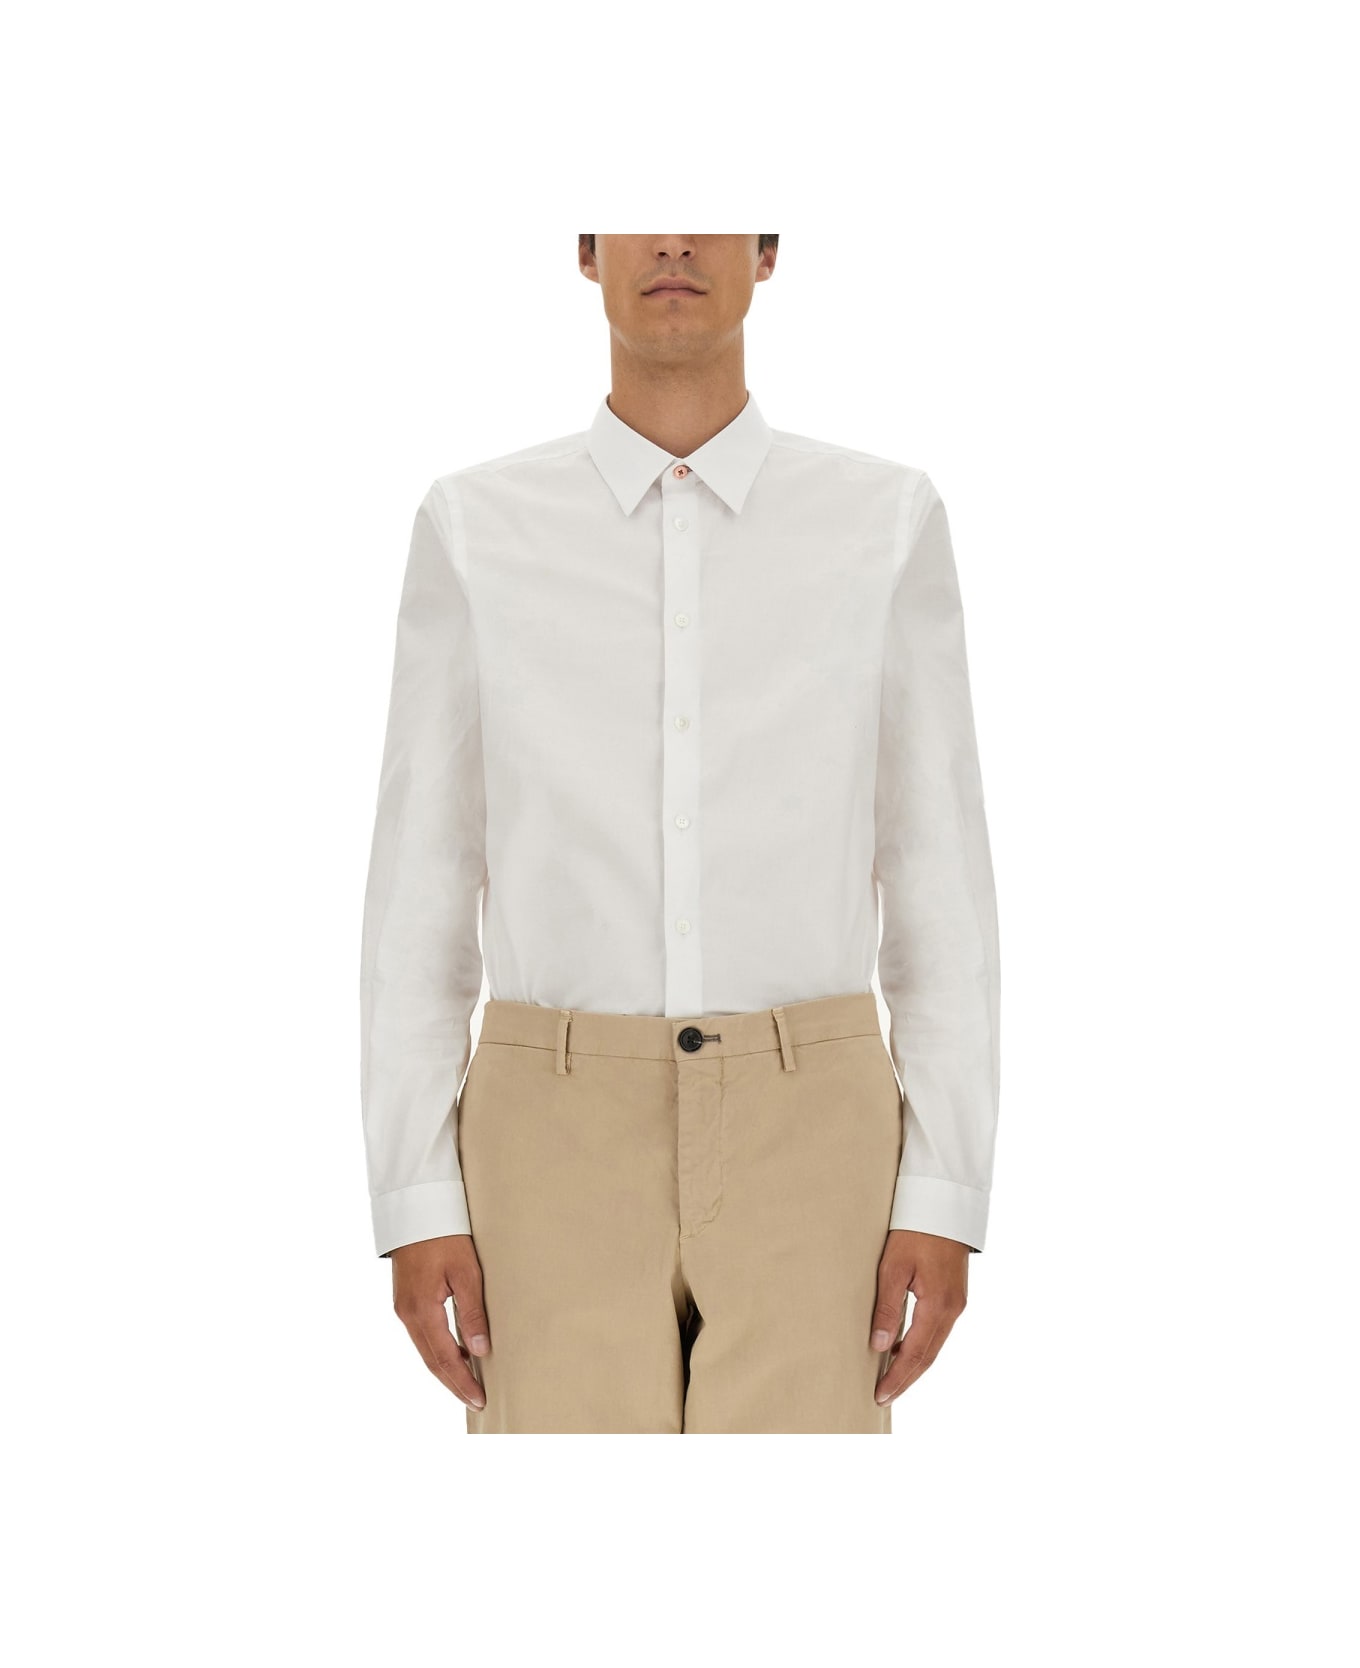 PS by Paul Smith Regular Fit Shirt - WHITE シャツ